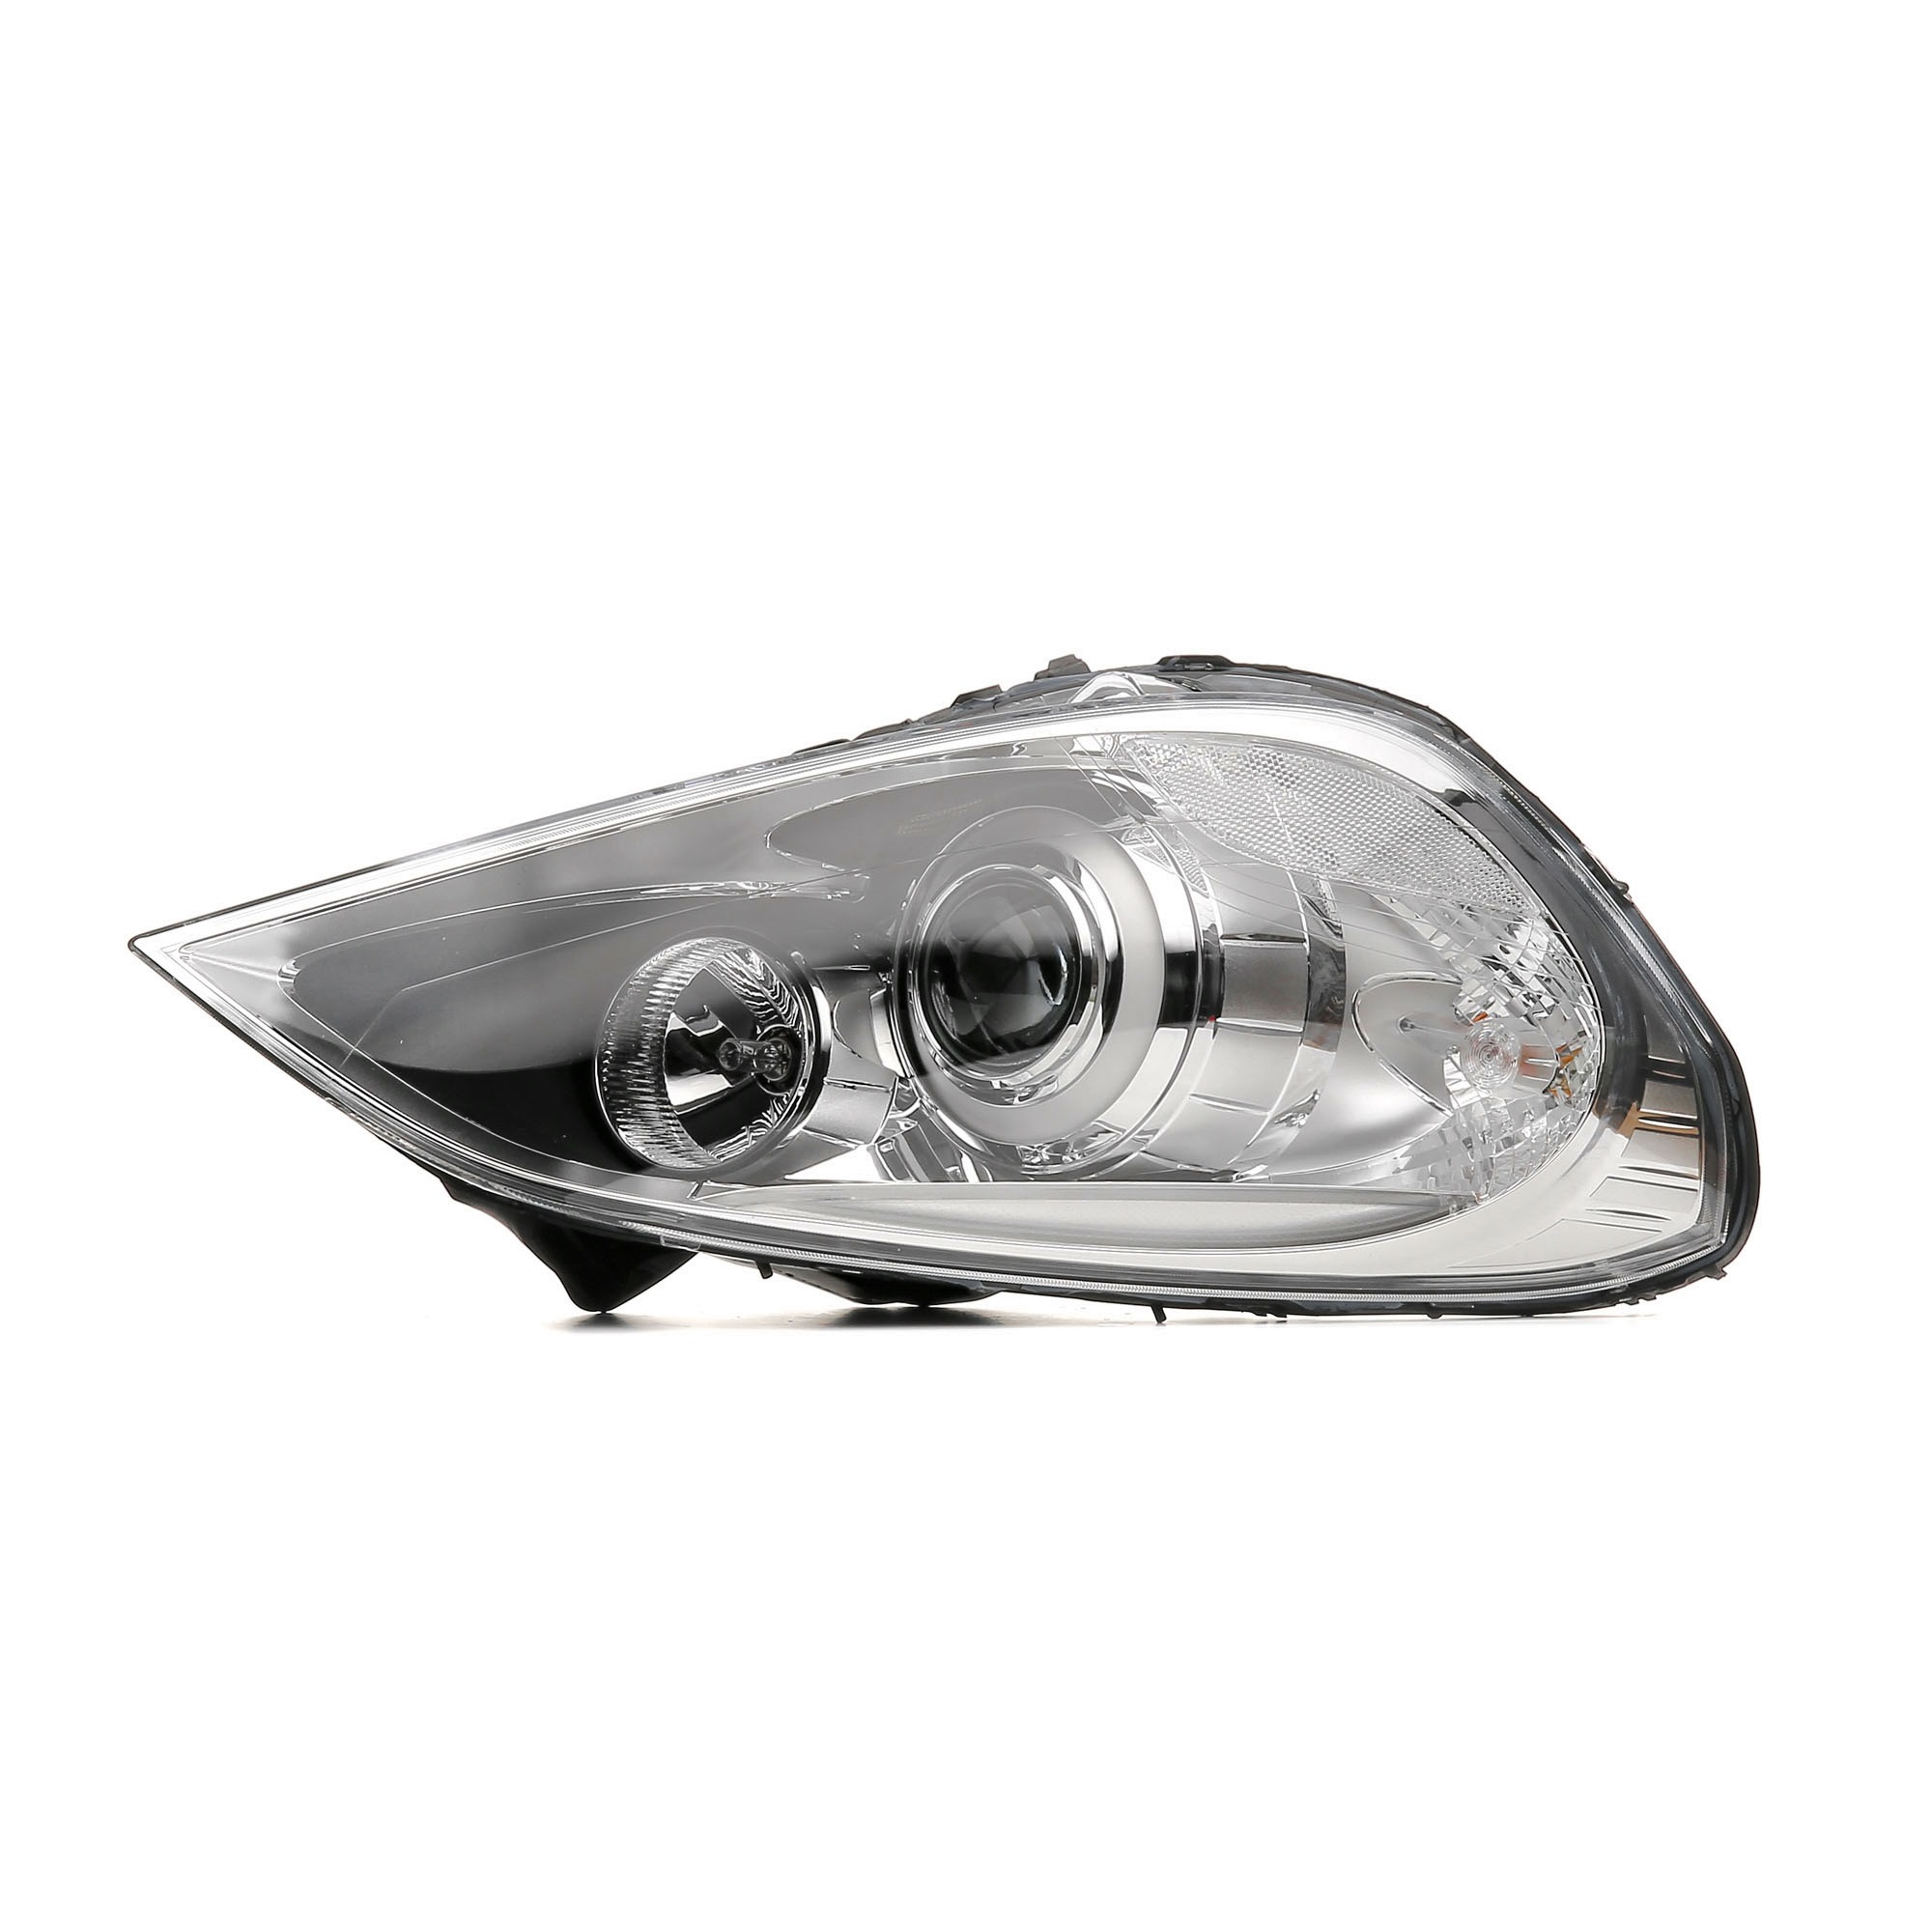 VALEO ORIGINAL PART 046957 Headlight Right, for right-hand traffic, without control unit for Xenon